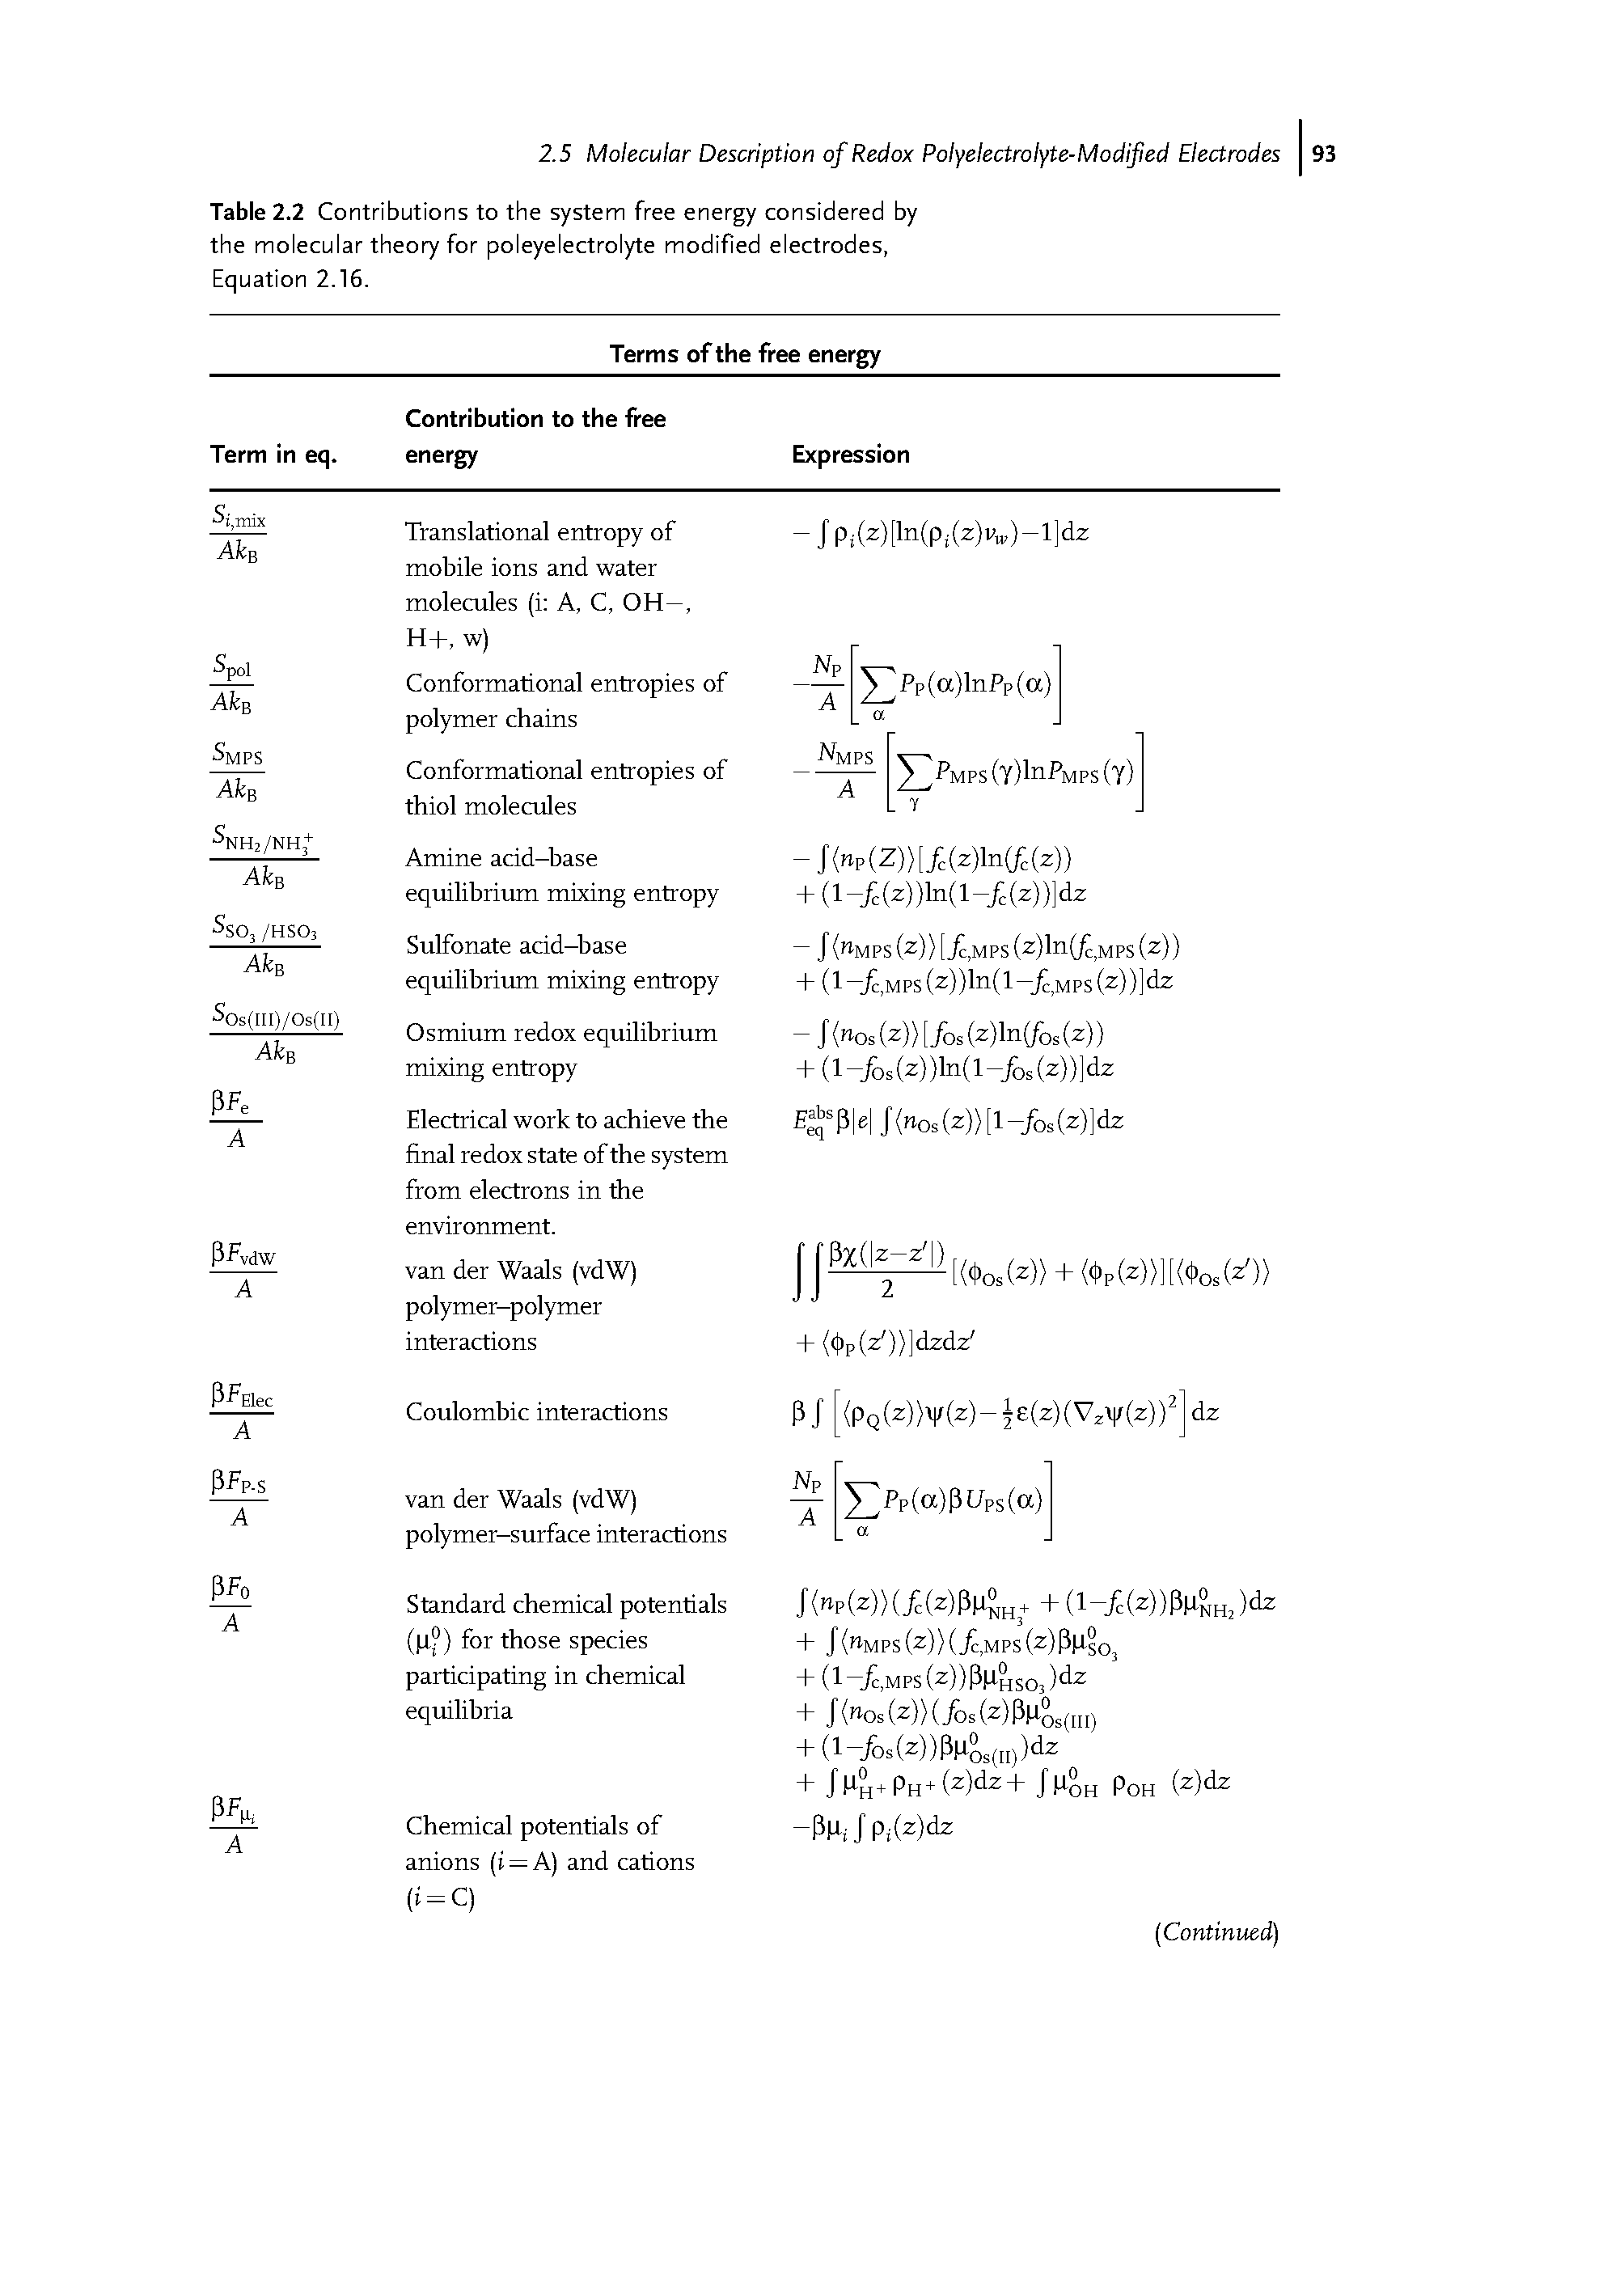 Table 2.2 Contributions to the system free energy considered by the molecular theory for poleyelectrolyte modified electrodes, Equation 2.16.